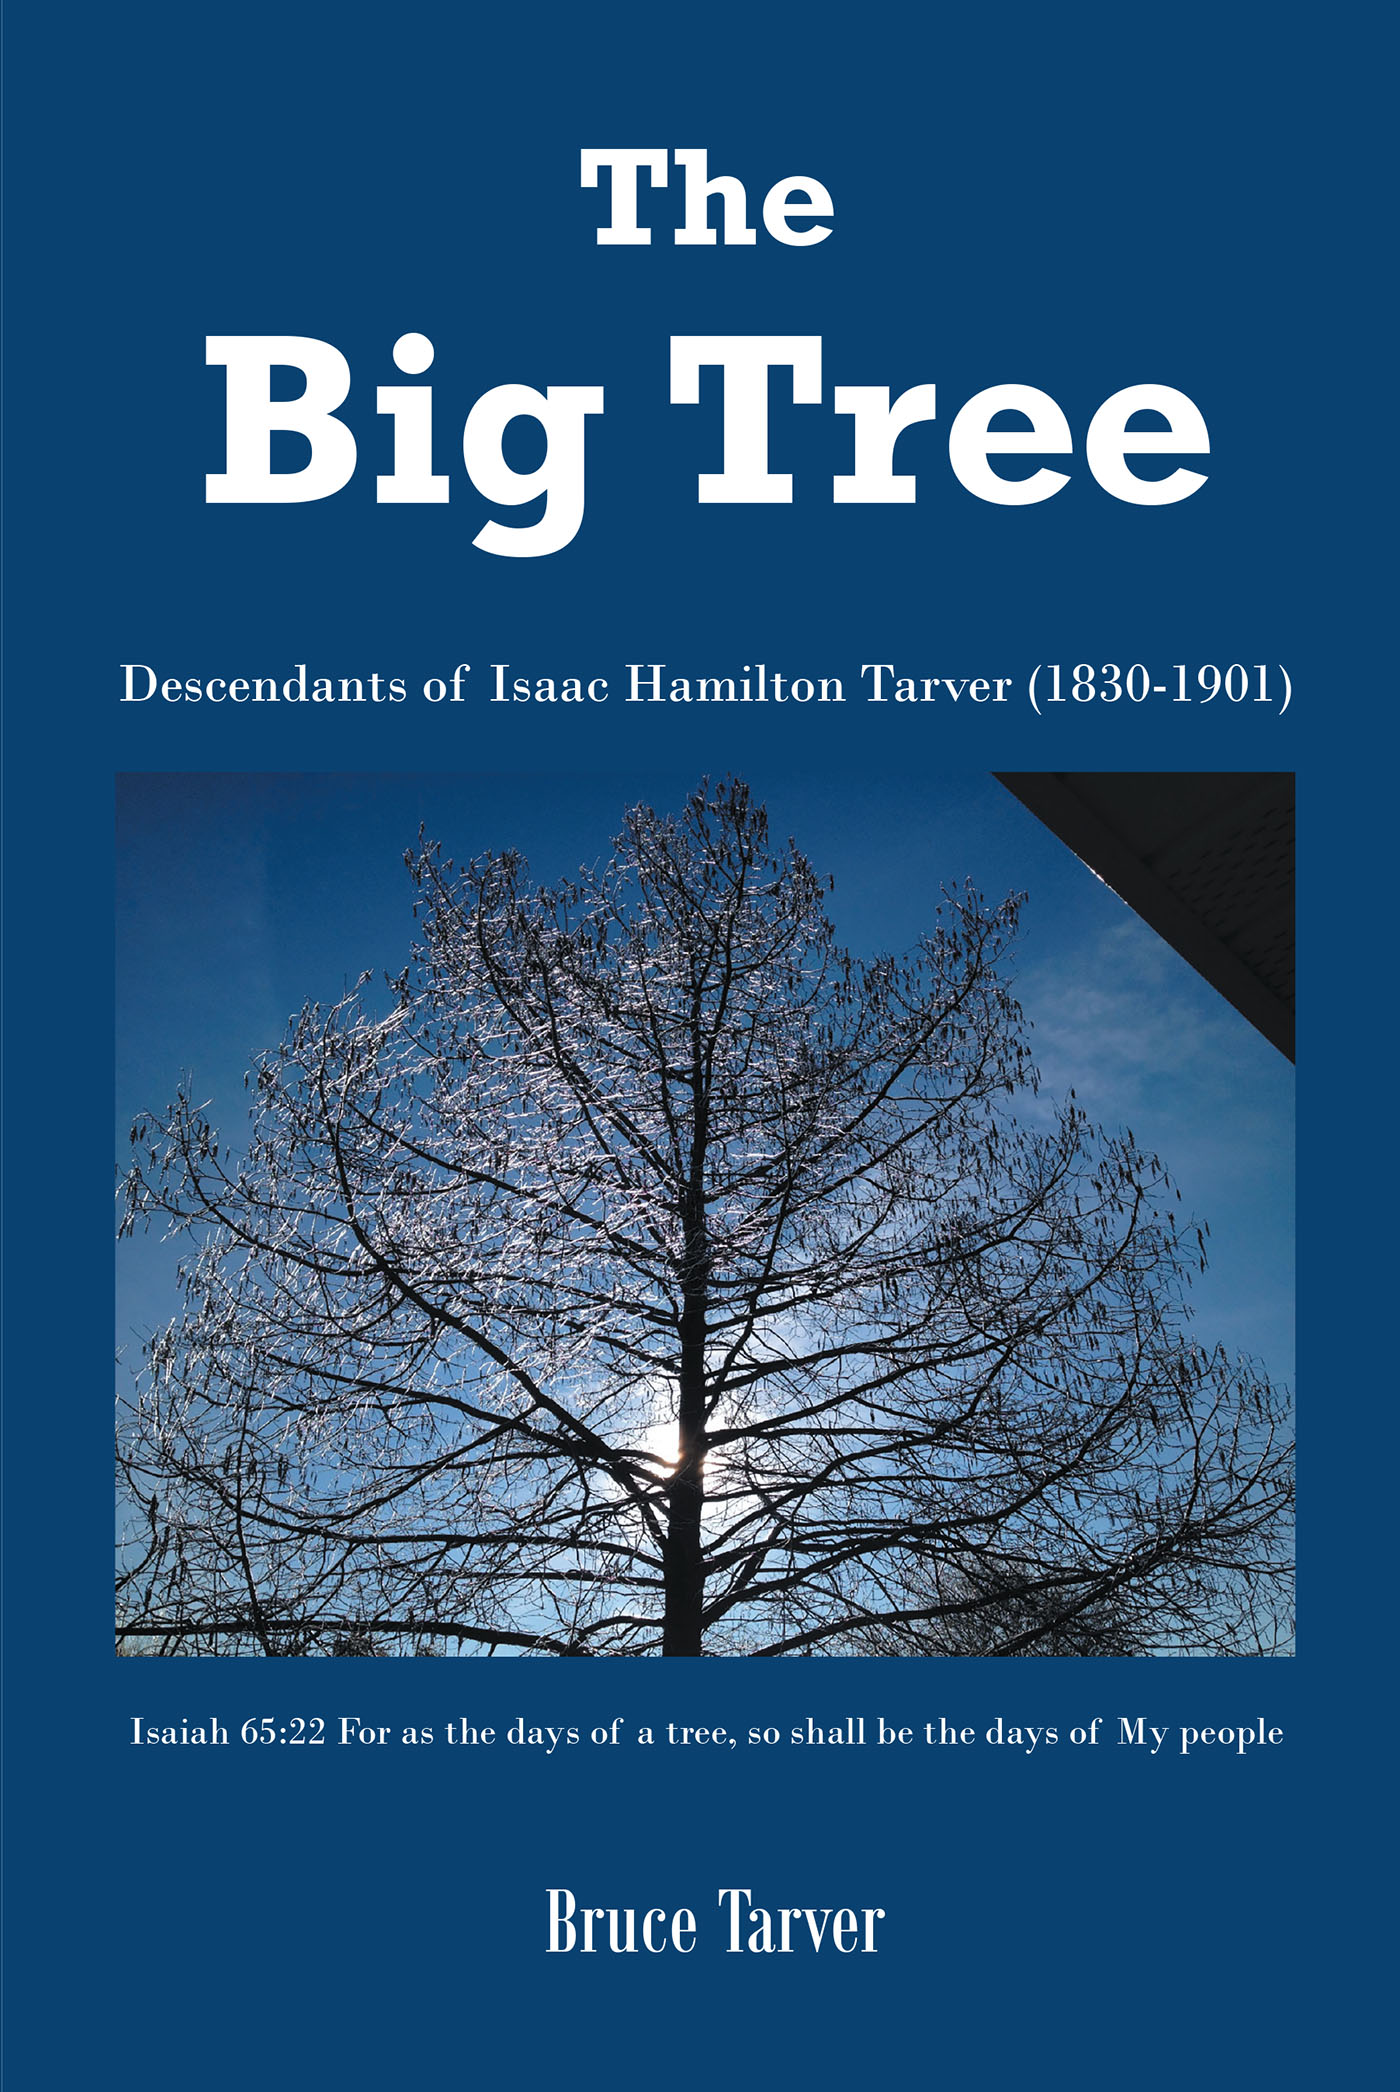 Author Bruce Tarver’s New Book, "The Big Tree," is a Captivating Look Back at the Author’s Family Tree, Compiled Through Years of Genealogical Research